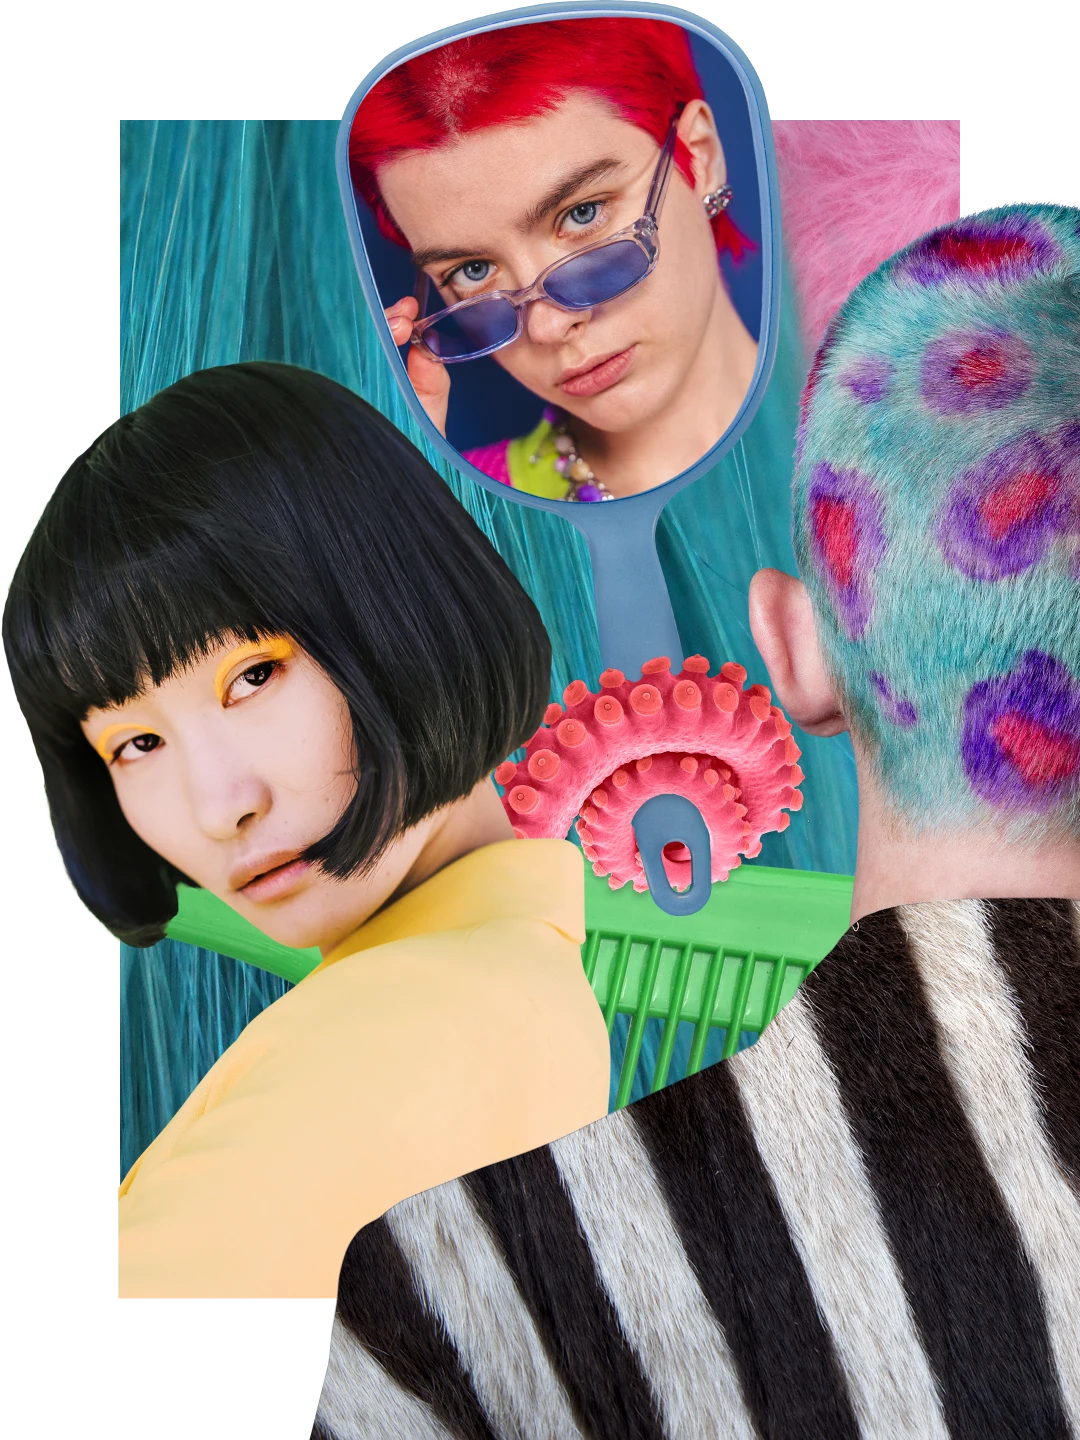 Collage of hairstyles and styling items. Hand mirror showing reflection of white person with bright red hair. Back of head dyed with a leopard print pattern. East Asian woman with a bob cut. Combs and shears.
